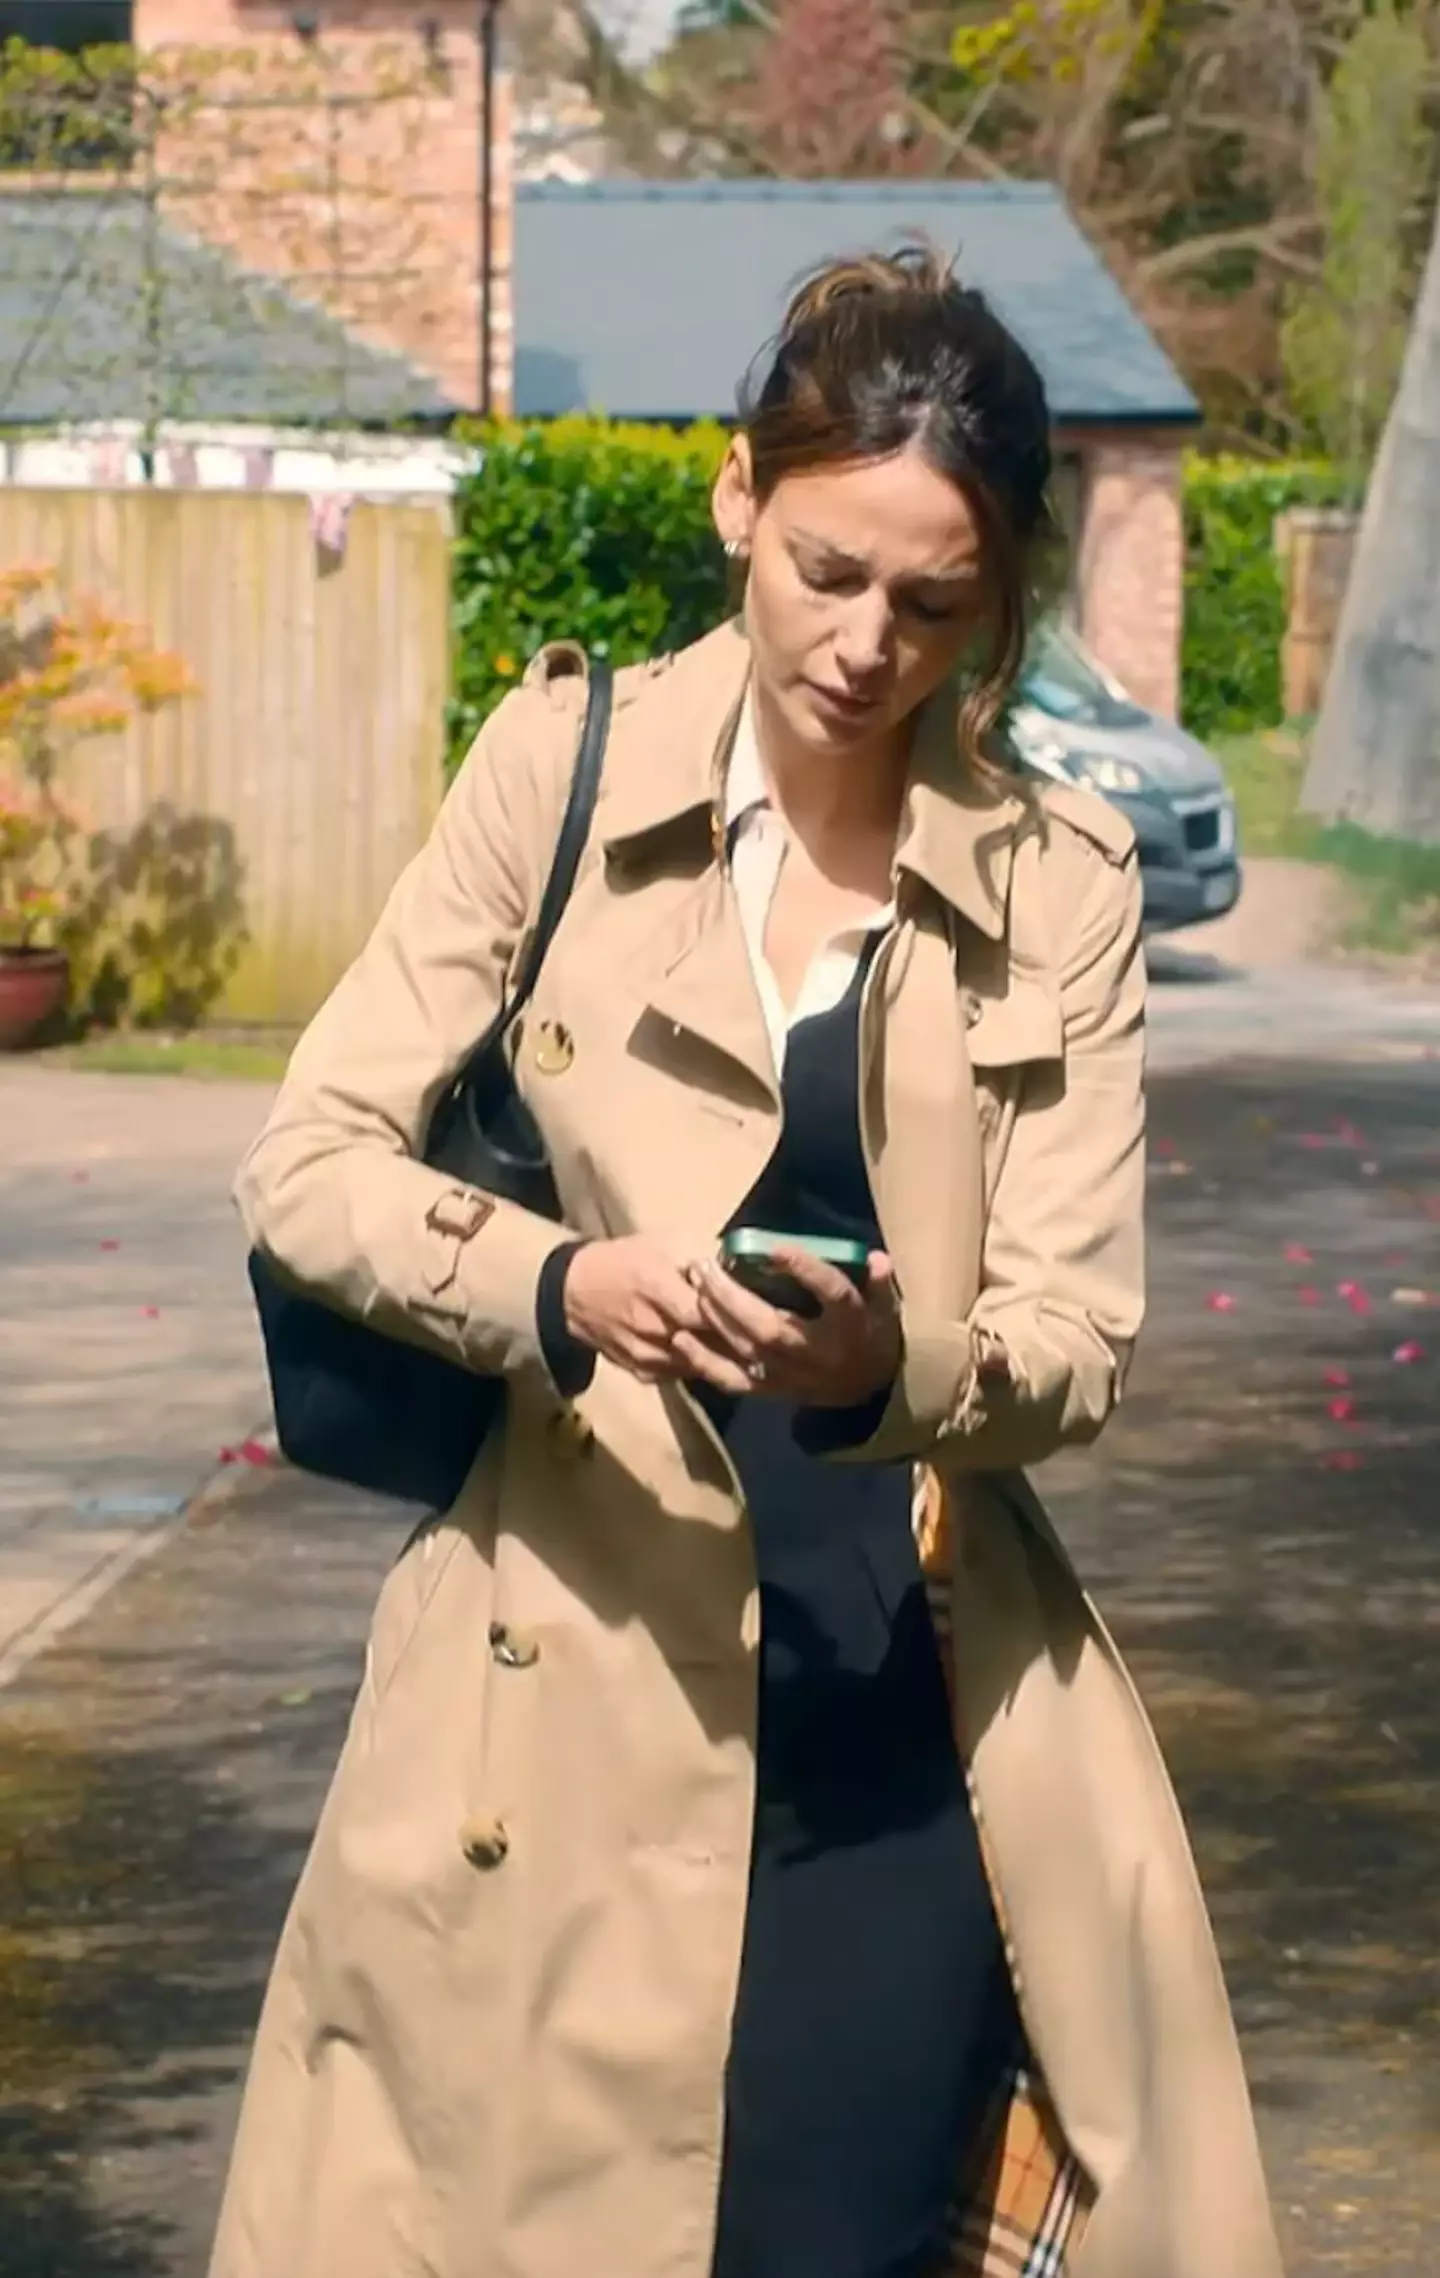 Her Burberry trench coat will set you back almost £2,000.